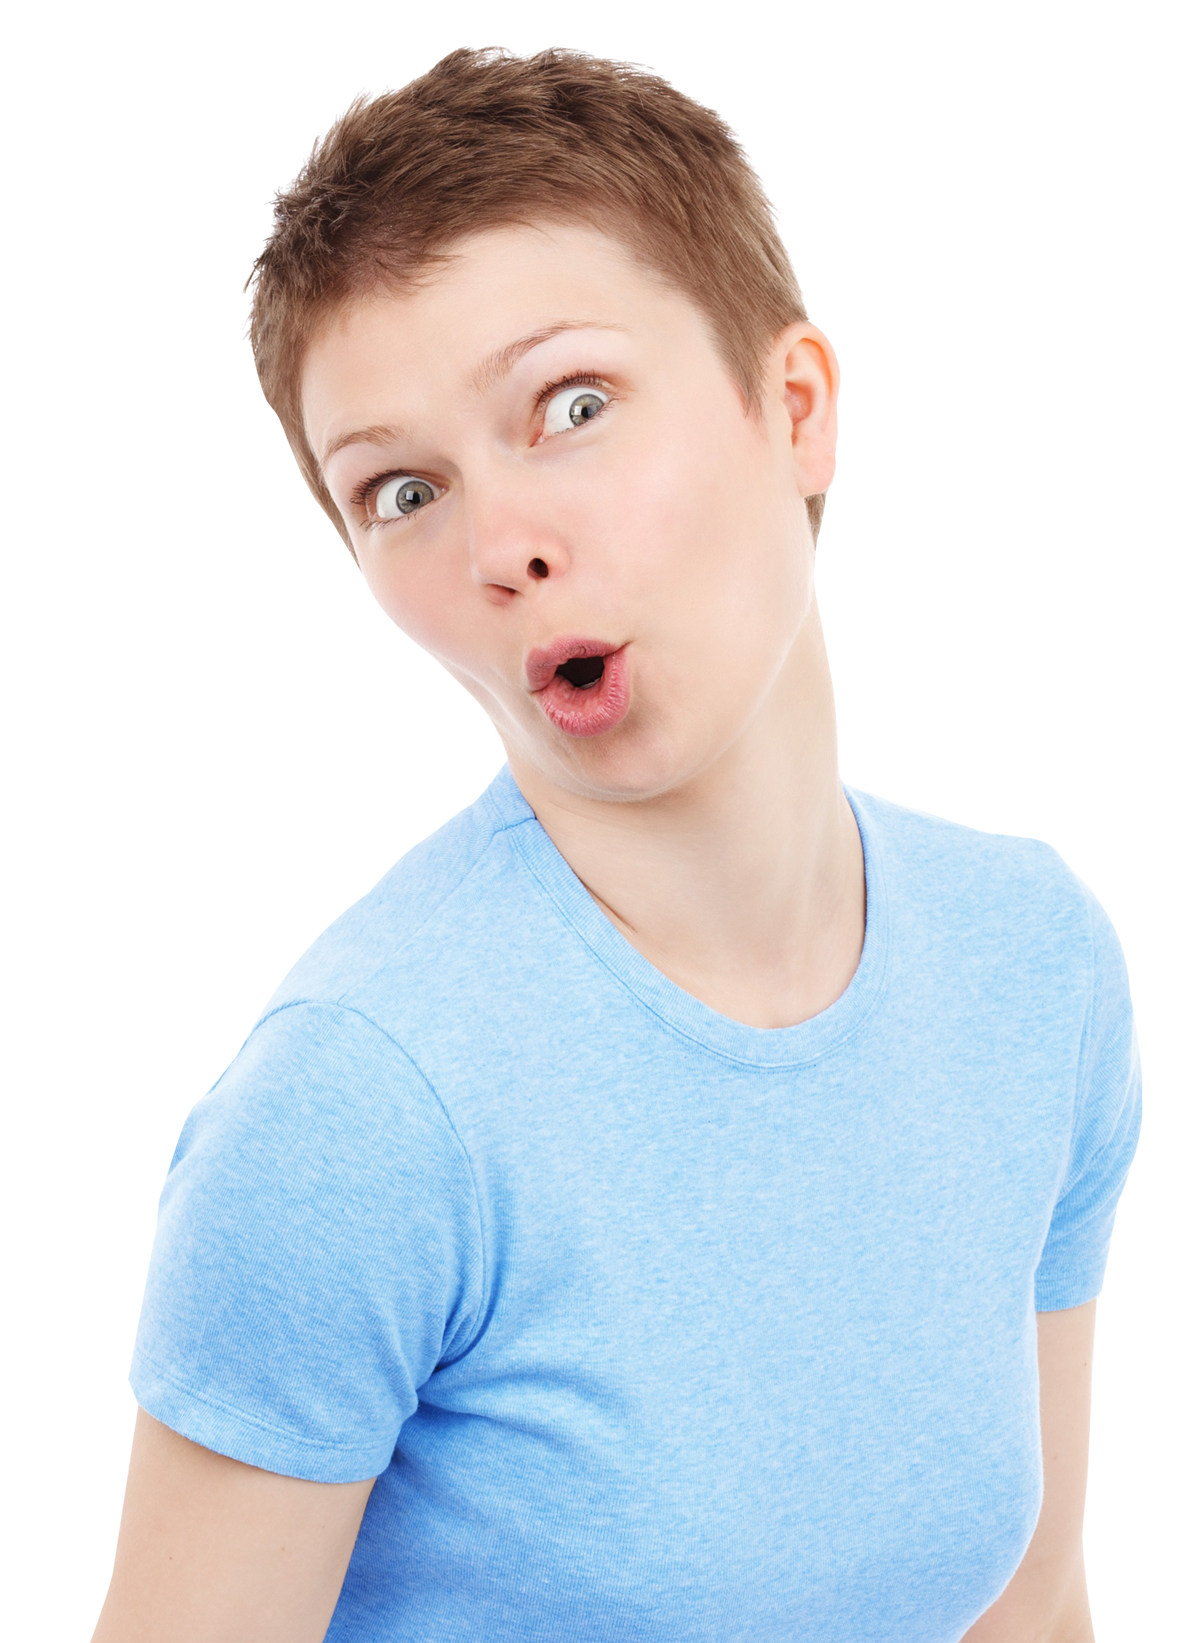 Surprised Expression Blue Shirt PNG